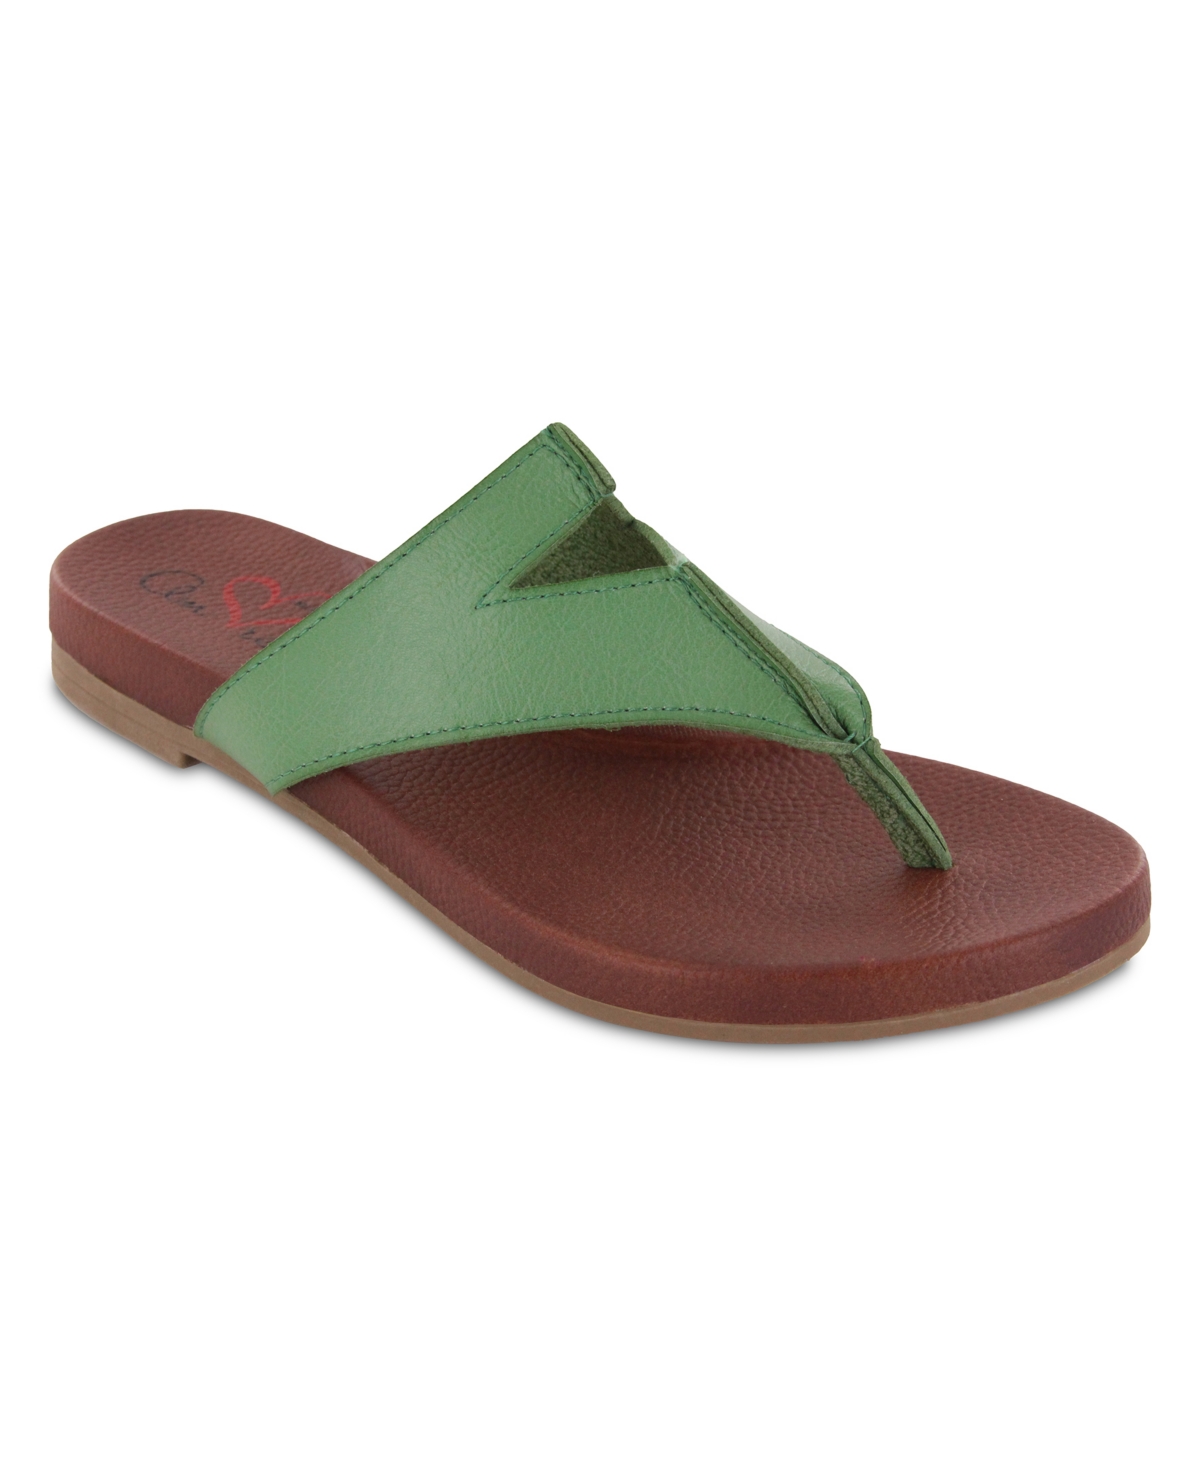 Mia Amore Women's Patriciaa - Wide Sandal Women's Shoes In Green